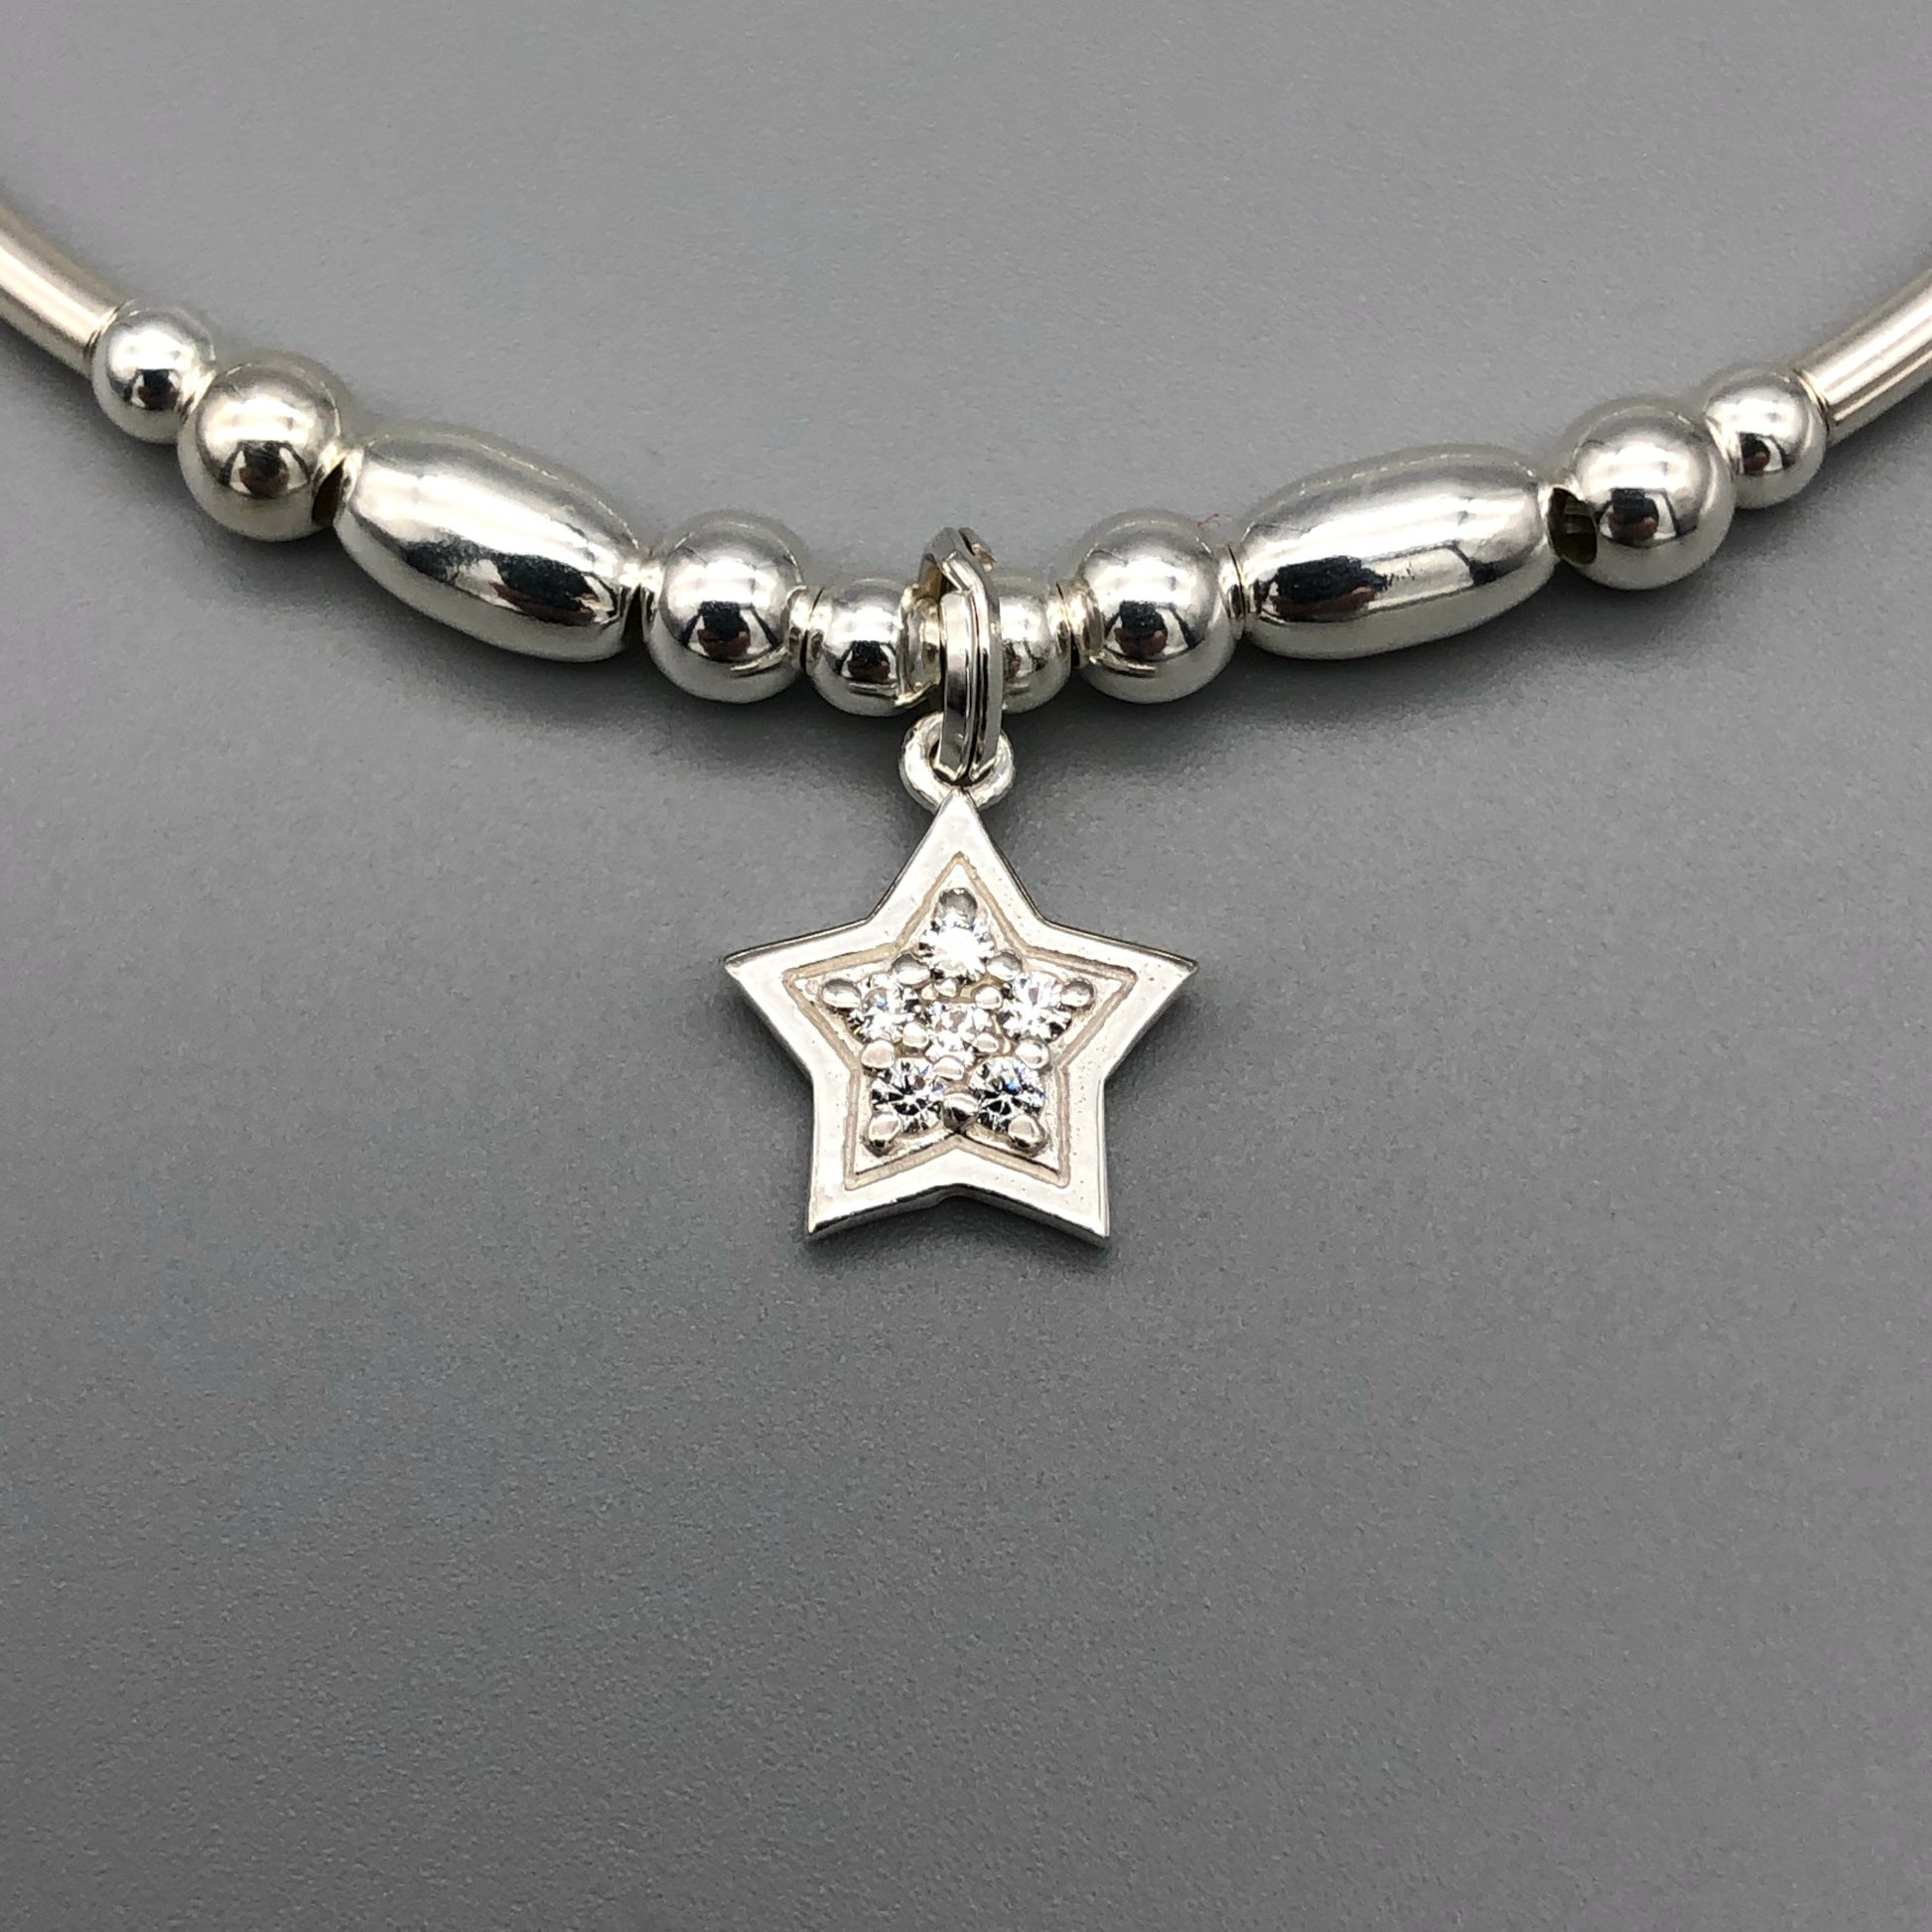 Closeup of Star Charm Sterling Silver Women's Stacking Bracelet by My Silver Wish